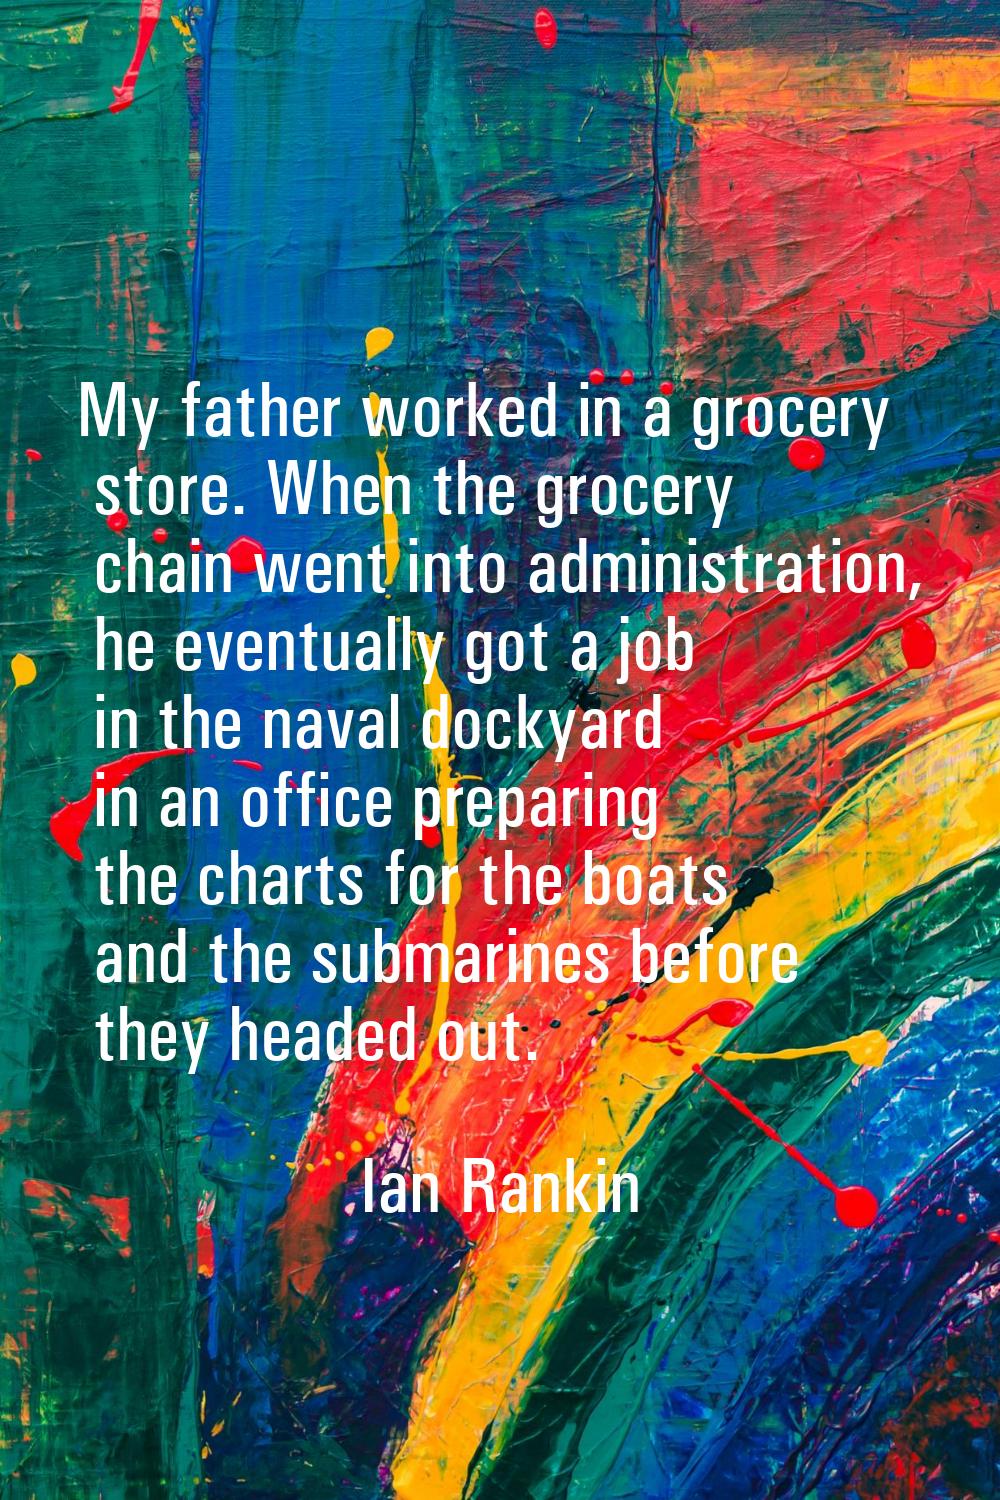 My father worked in a grocery store. When the grocery chain went into administration, he eventually